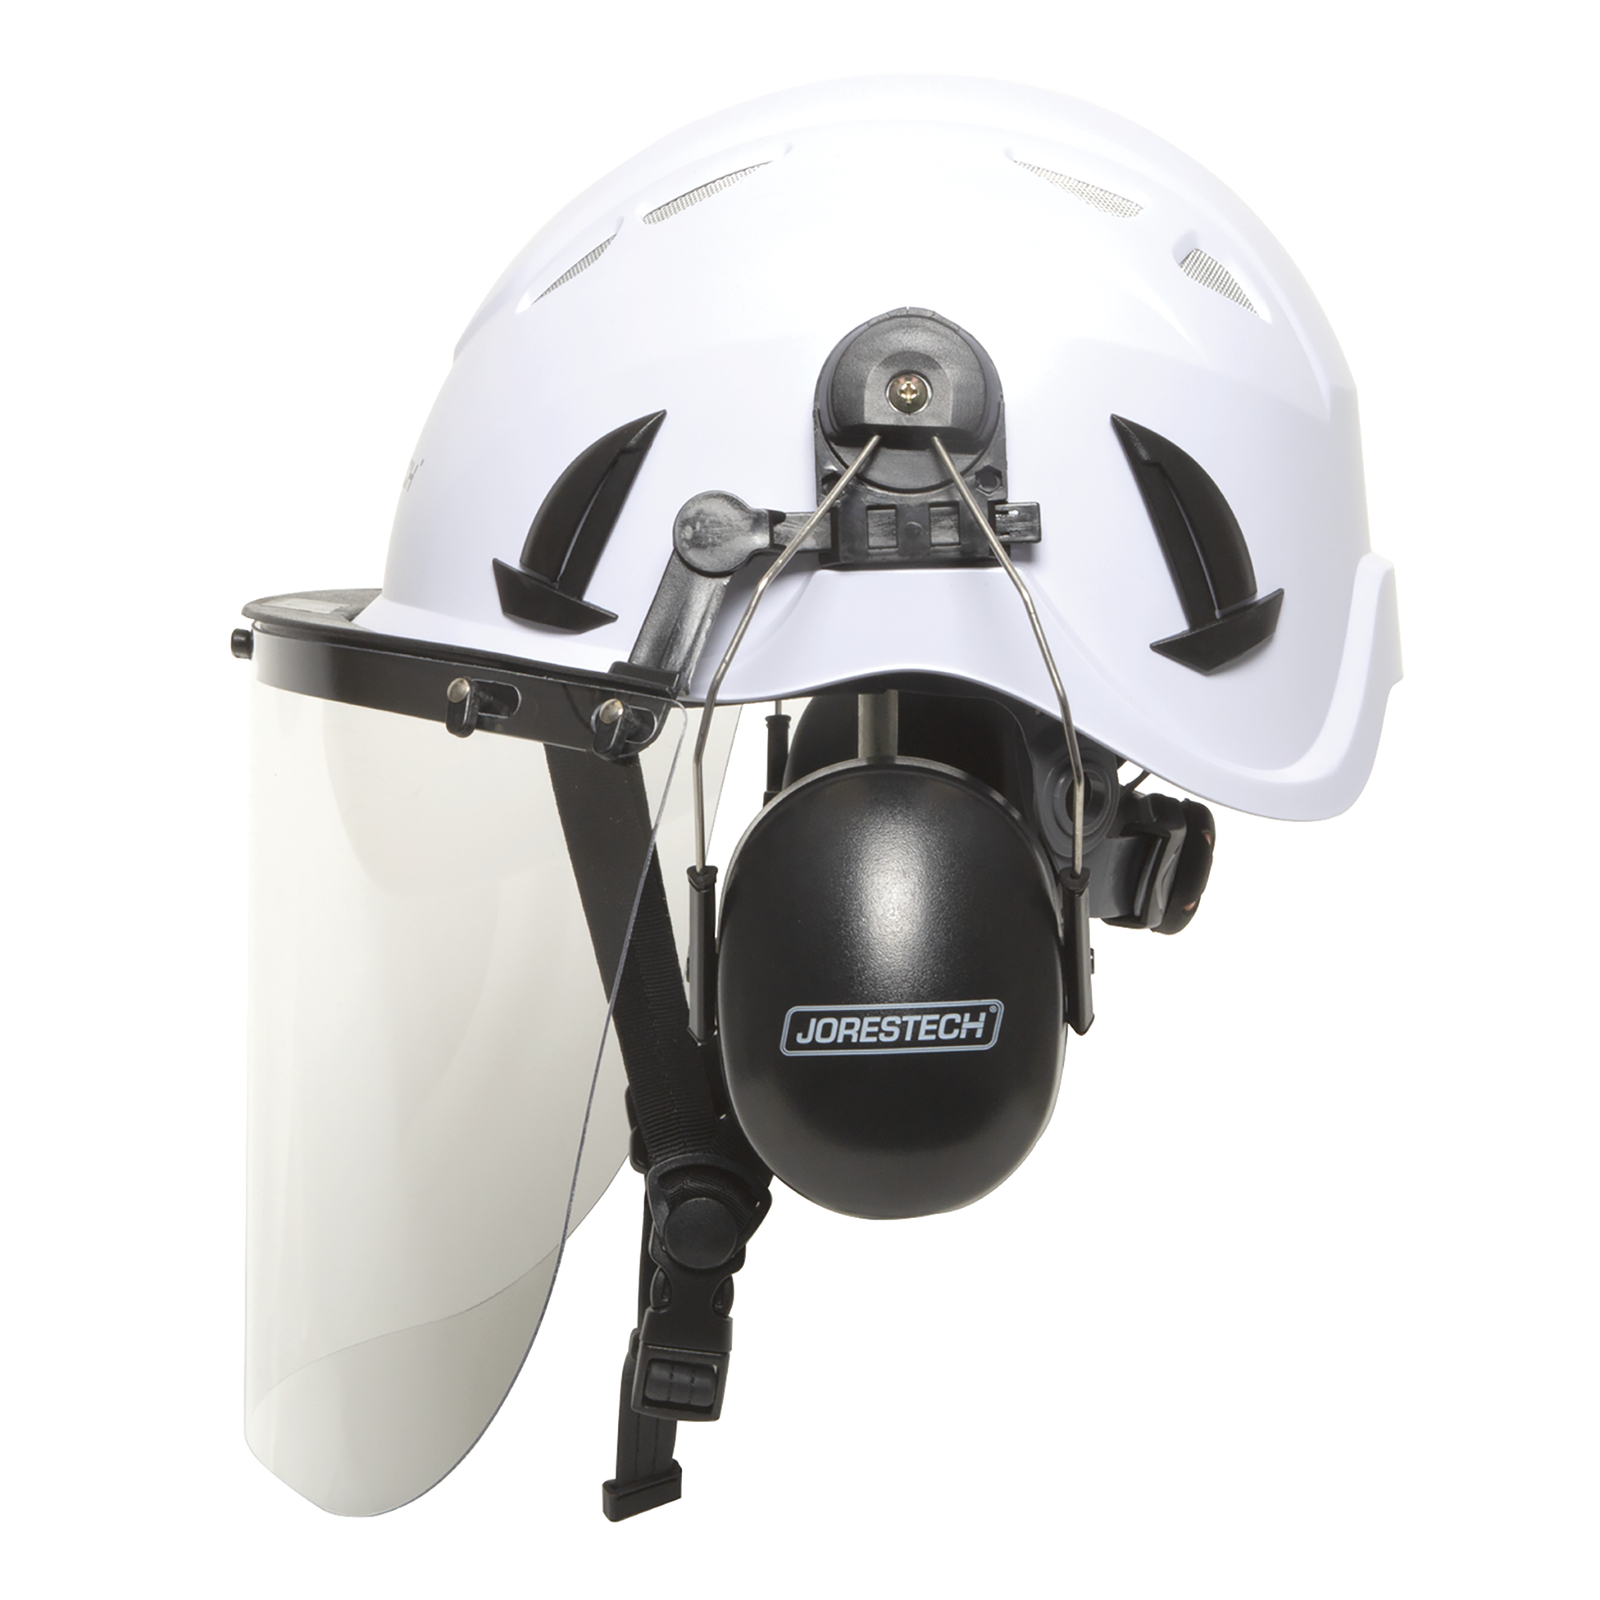 Side view of a white ventilated safety work at height JORESTECH helmet system with clear plastic face shield and black ear muffs included